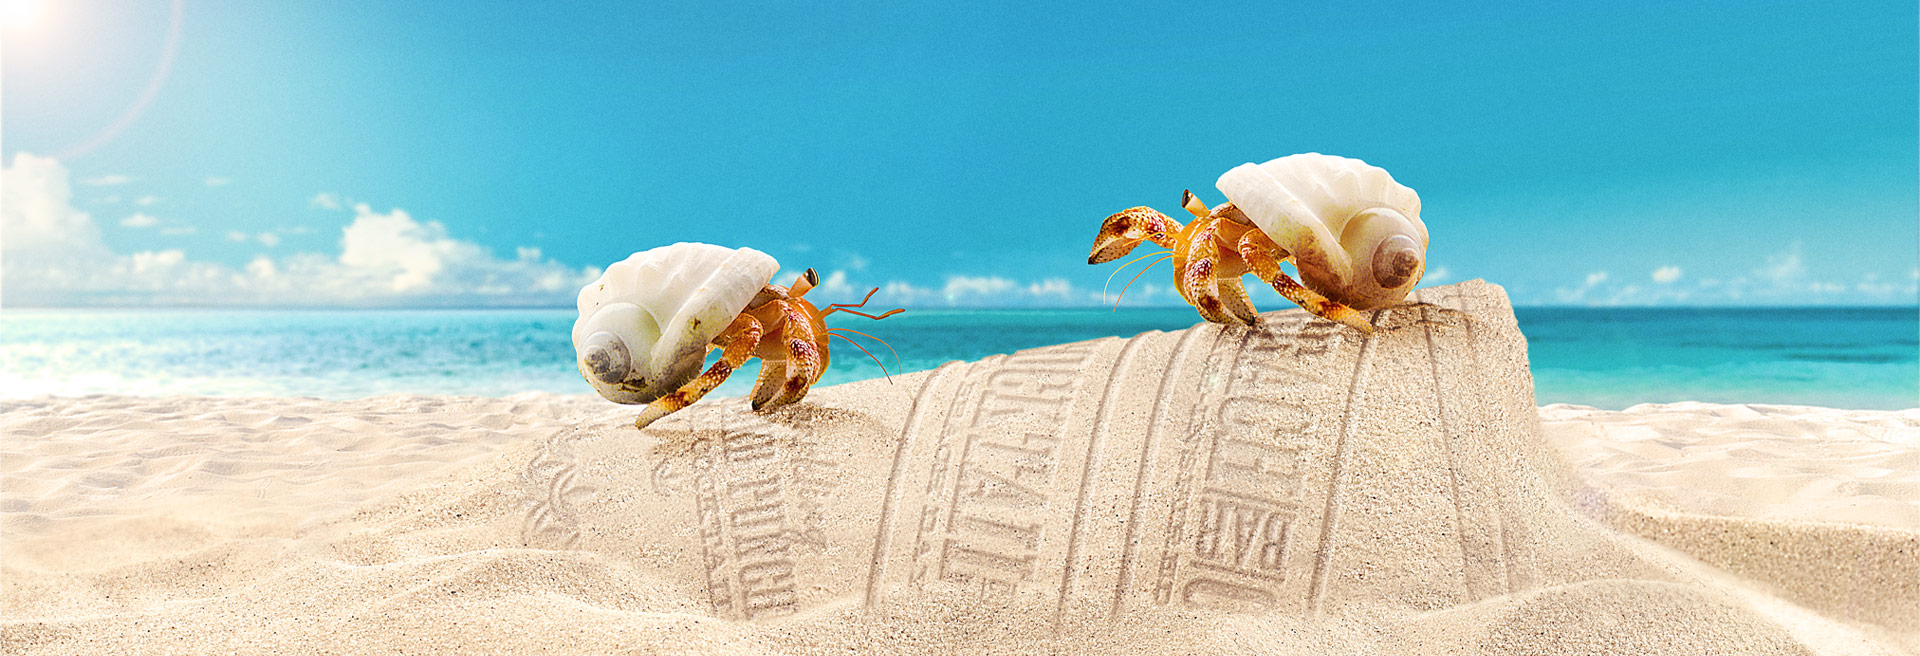 Two crabs on sand sculpted into SBBR can